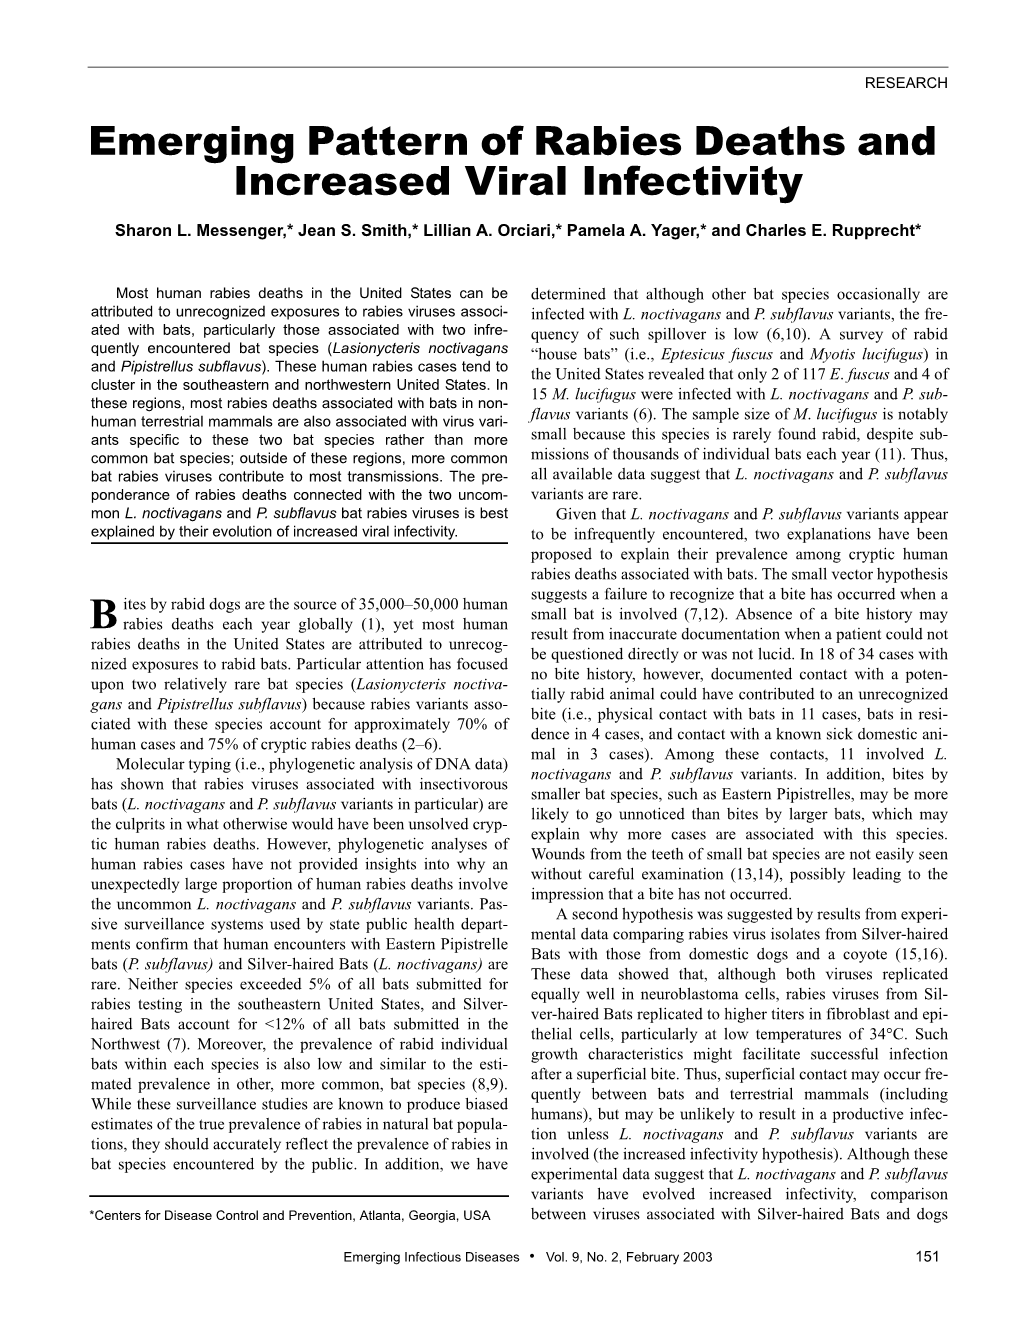 Emerging Pattern of Rabies Deaths and Increased Viral Infectivity Sharon L